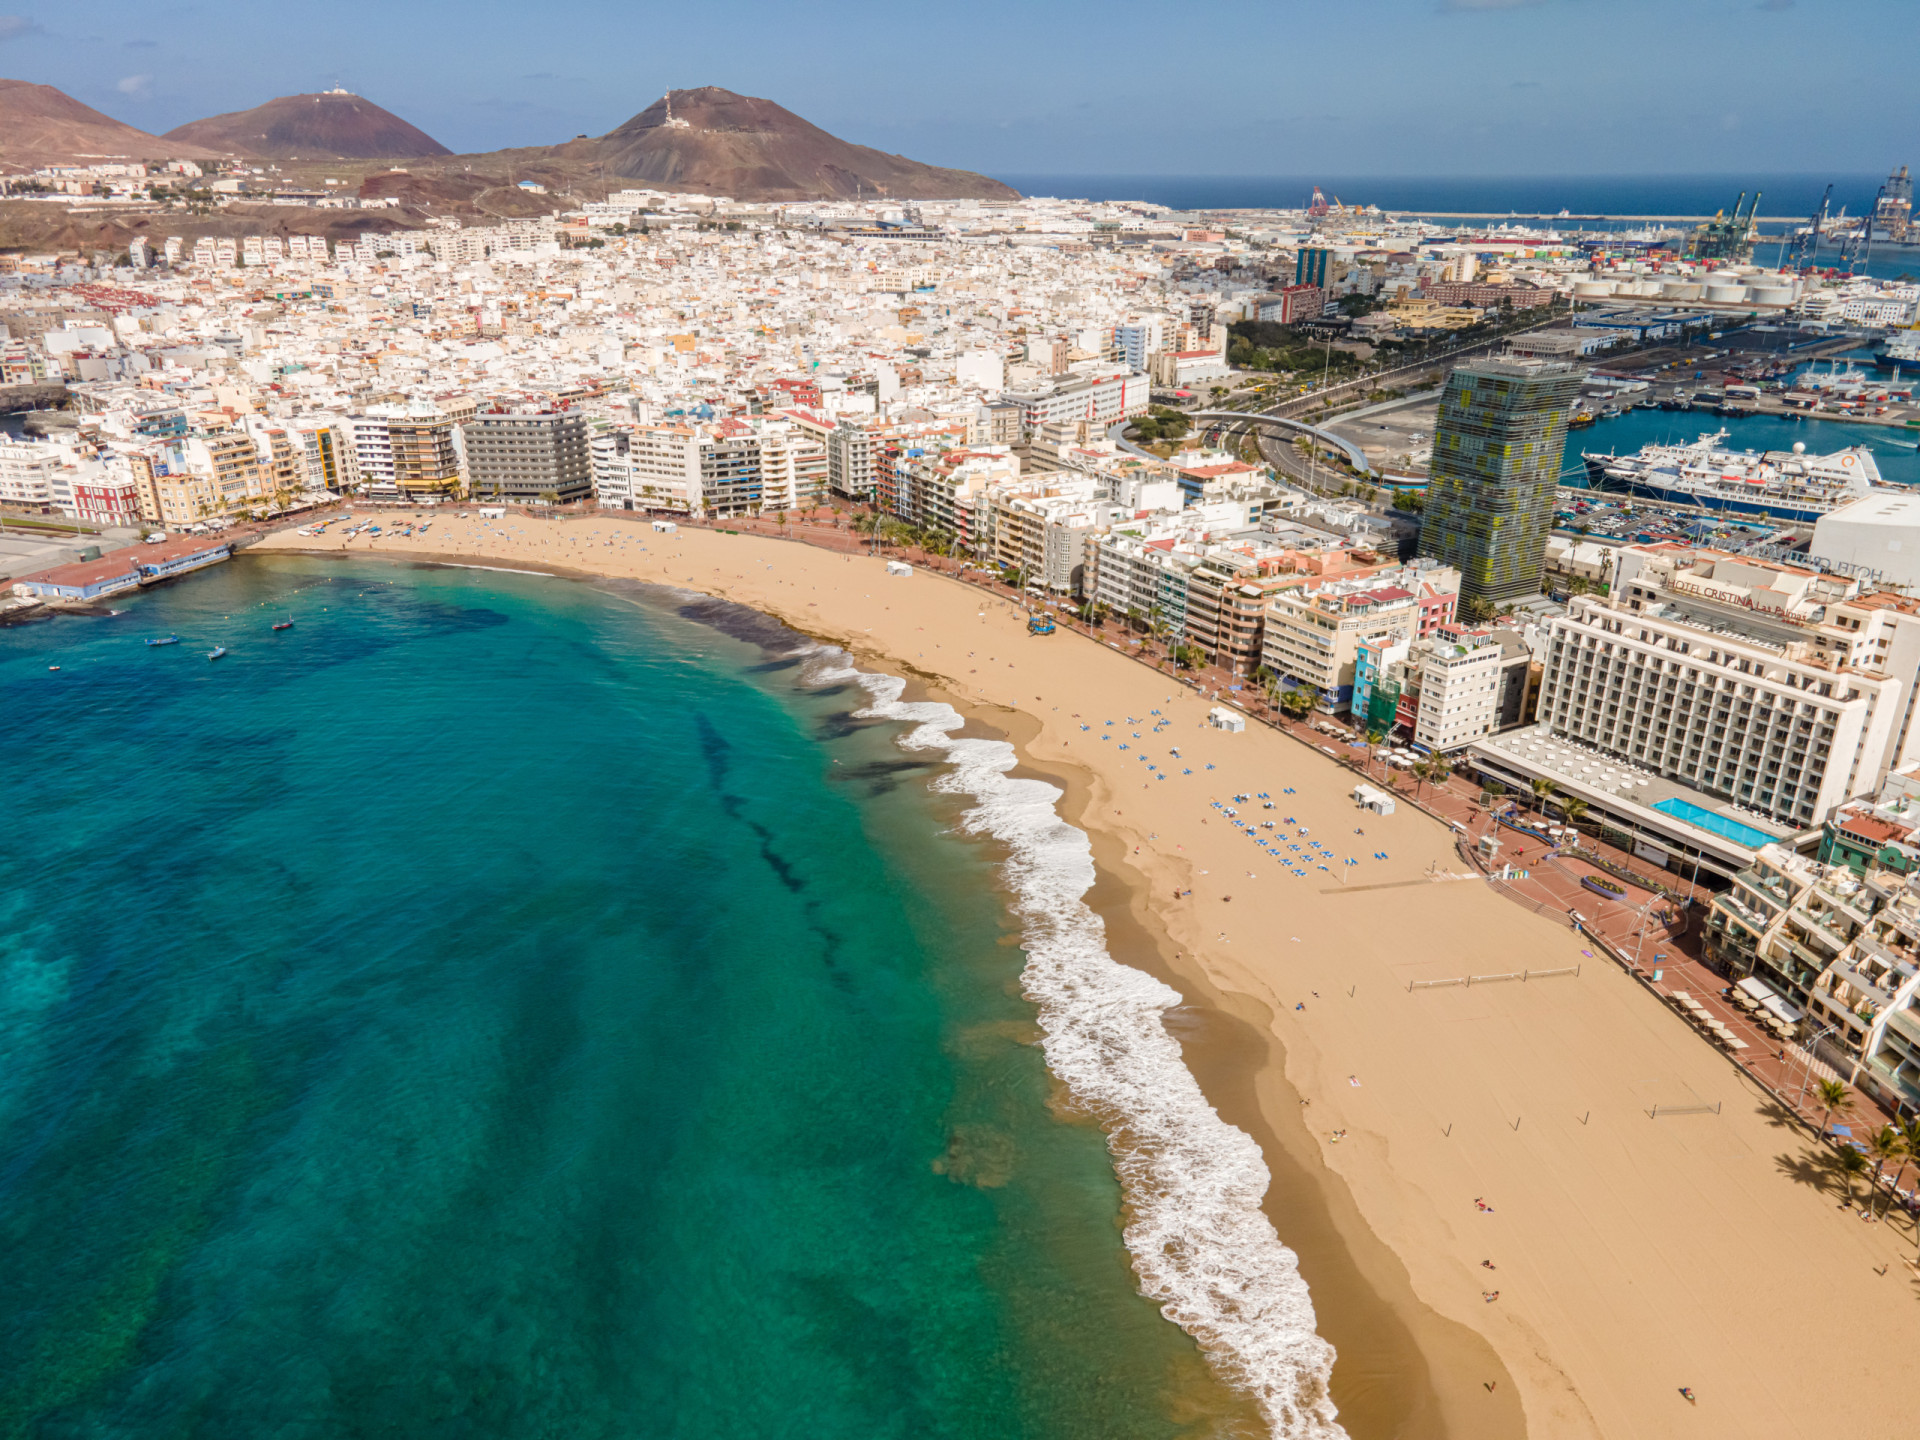 <p>Score: 4.213</p> <p>In the vibrant heart of Las Palmas on the island of Gran Canaria lies one of Europe's most famous city beaches, Las Canteras.</p><p>You may also like:<a href="https://www.starsinsider.com/n/157708?utm_source=msn.com&utm_medium=display&utm_campaign=referral_description&utm_content=697708en-en_selected"> The most shocking scandals in sports history</a></p>